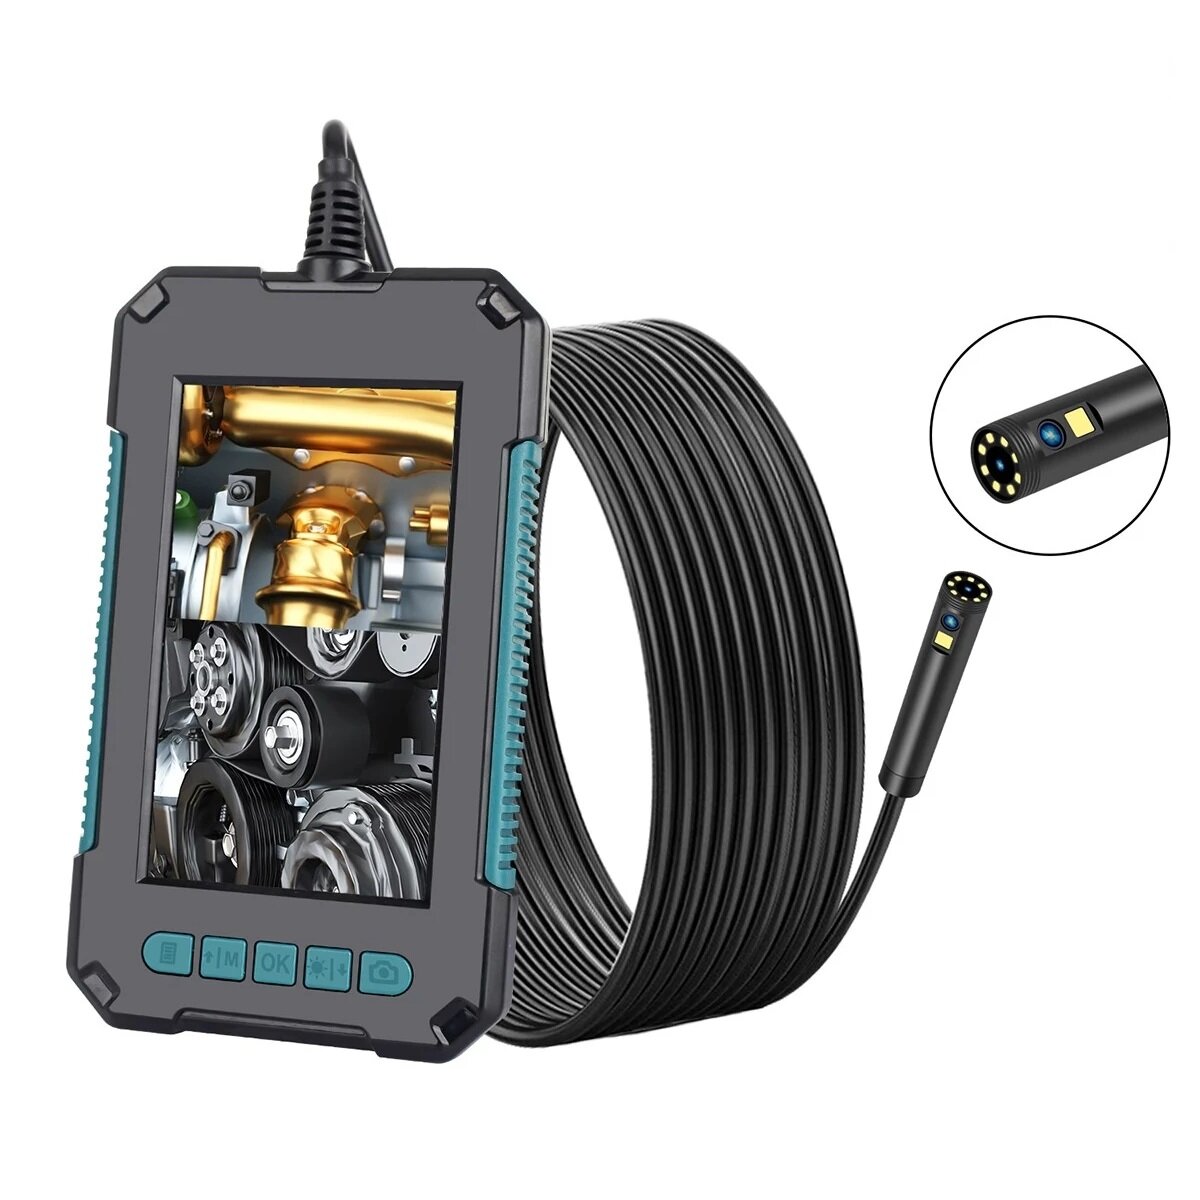 Handheld Borescope 4.3 Inches IPS Screen 1080P High Definition IP68 Industrial Borescope with 9 LEDs 8mm Lens 2 Megapixe